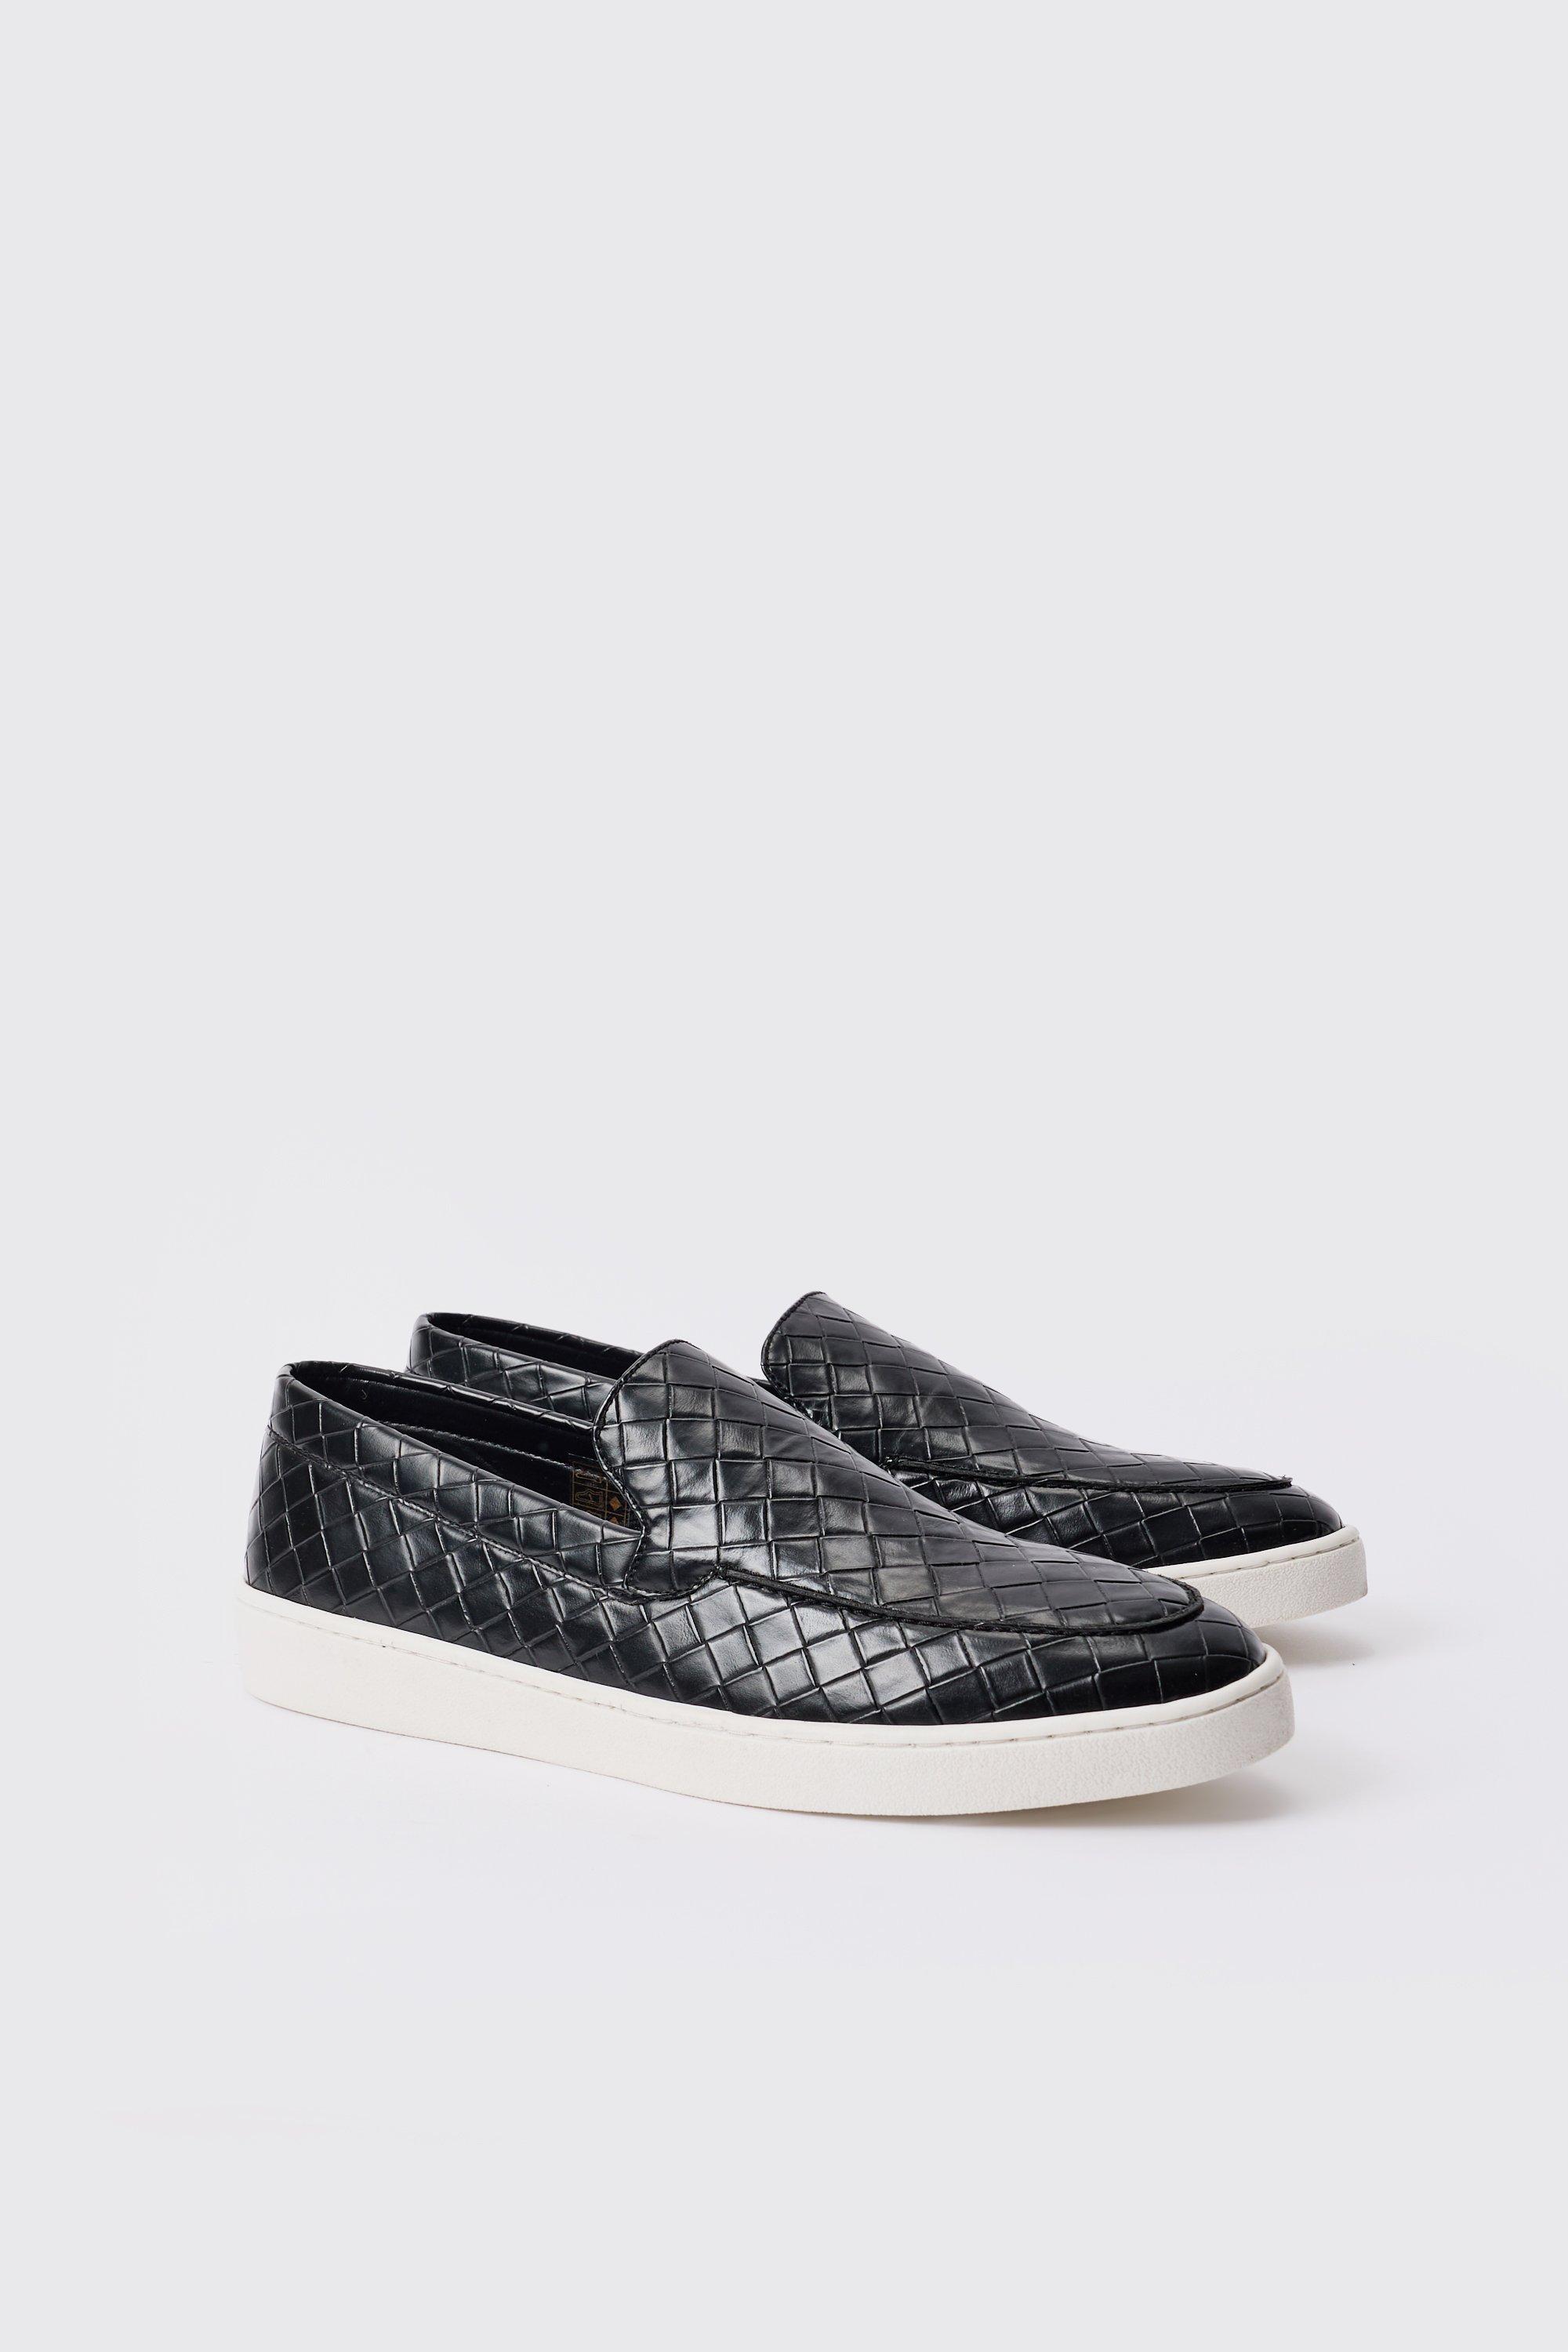 Image of Woven Pu Slip On Loafer In Black, Nero